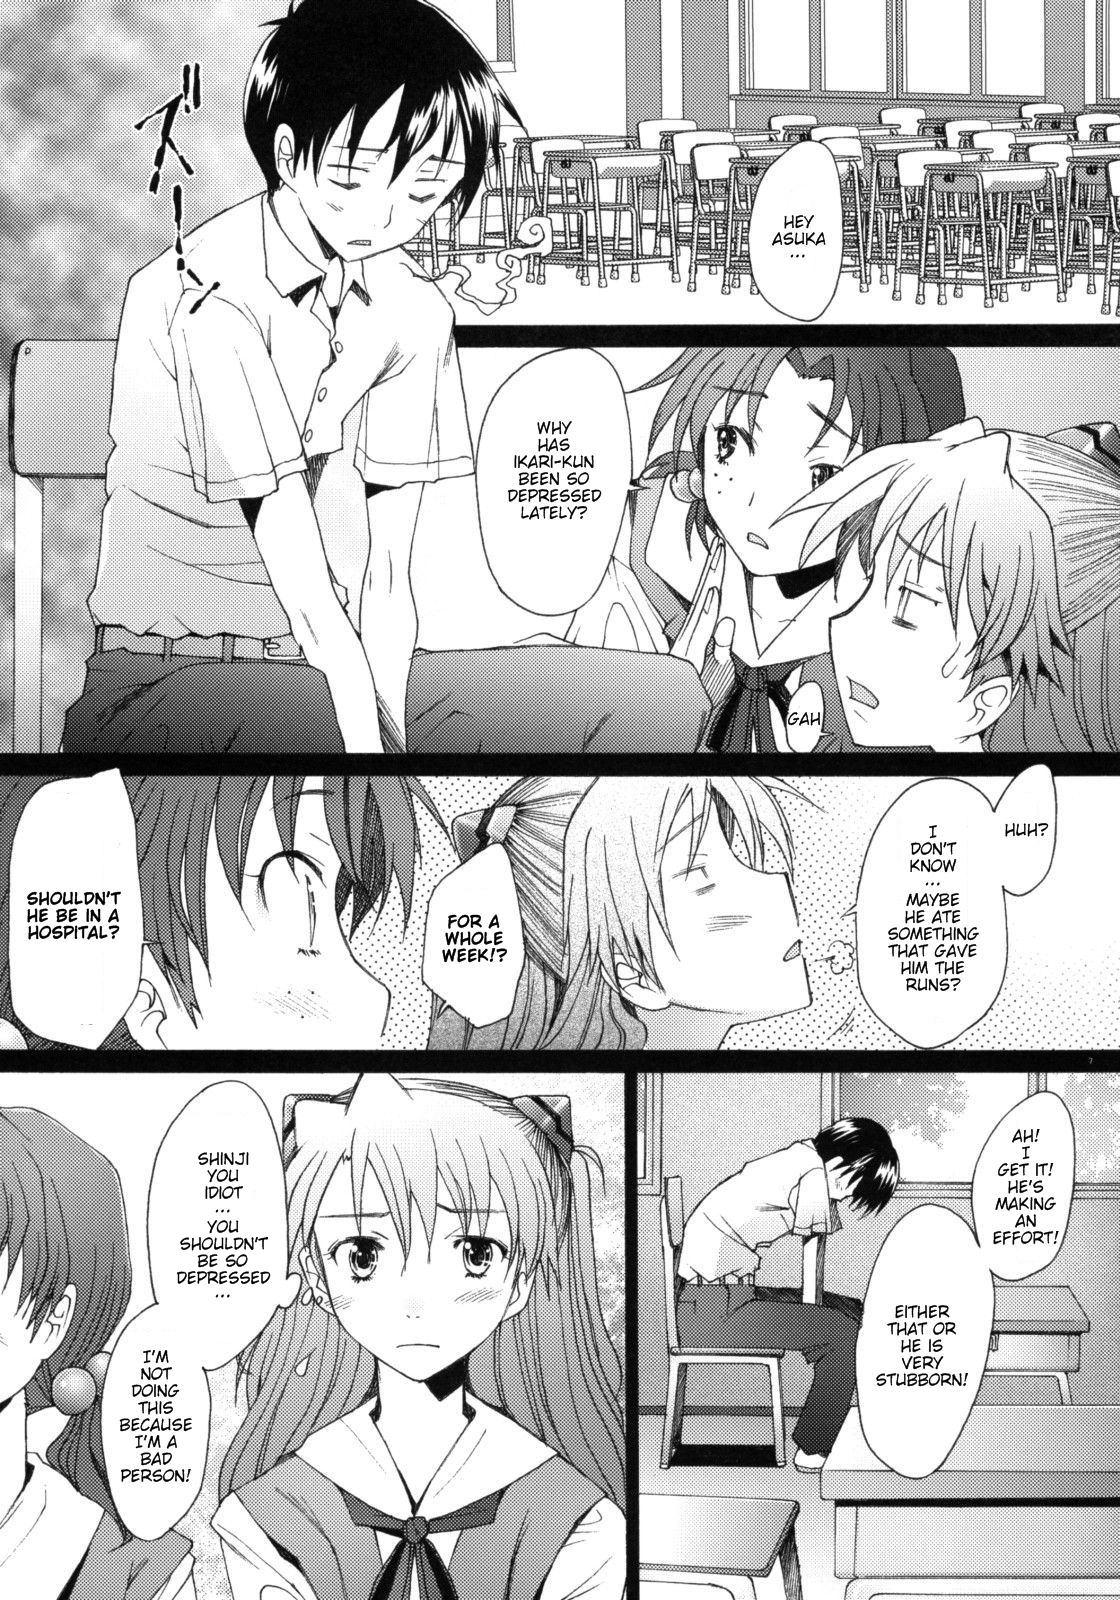 Brazzers Confusion LEVEL A vol.2 - Neon genesis evangelion This - Page 6